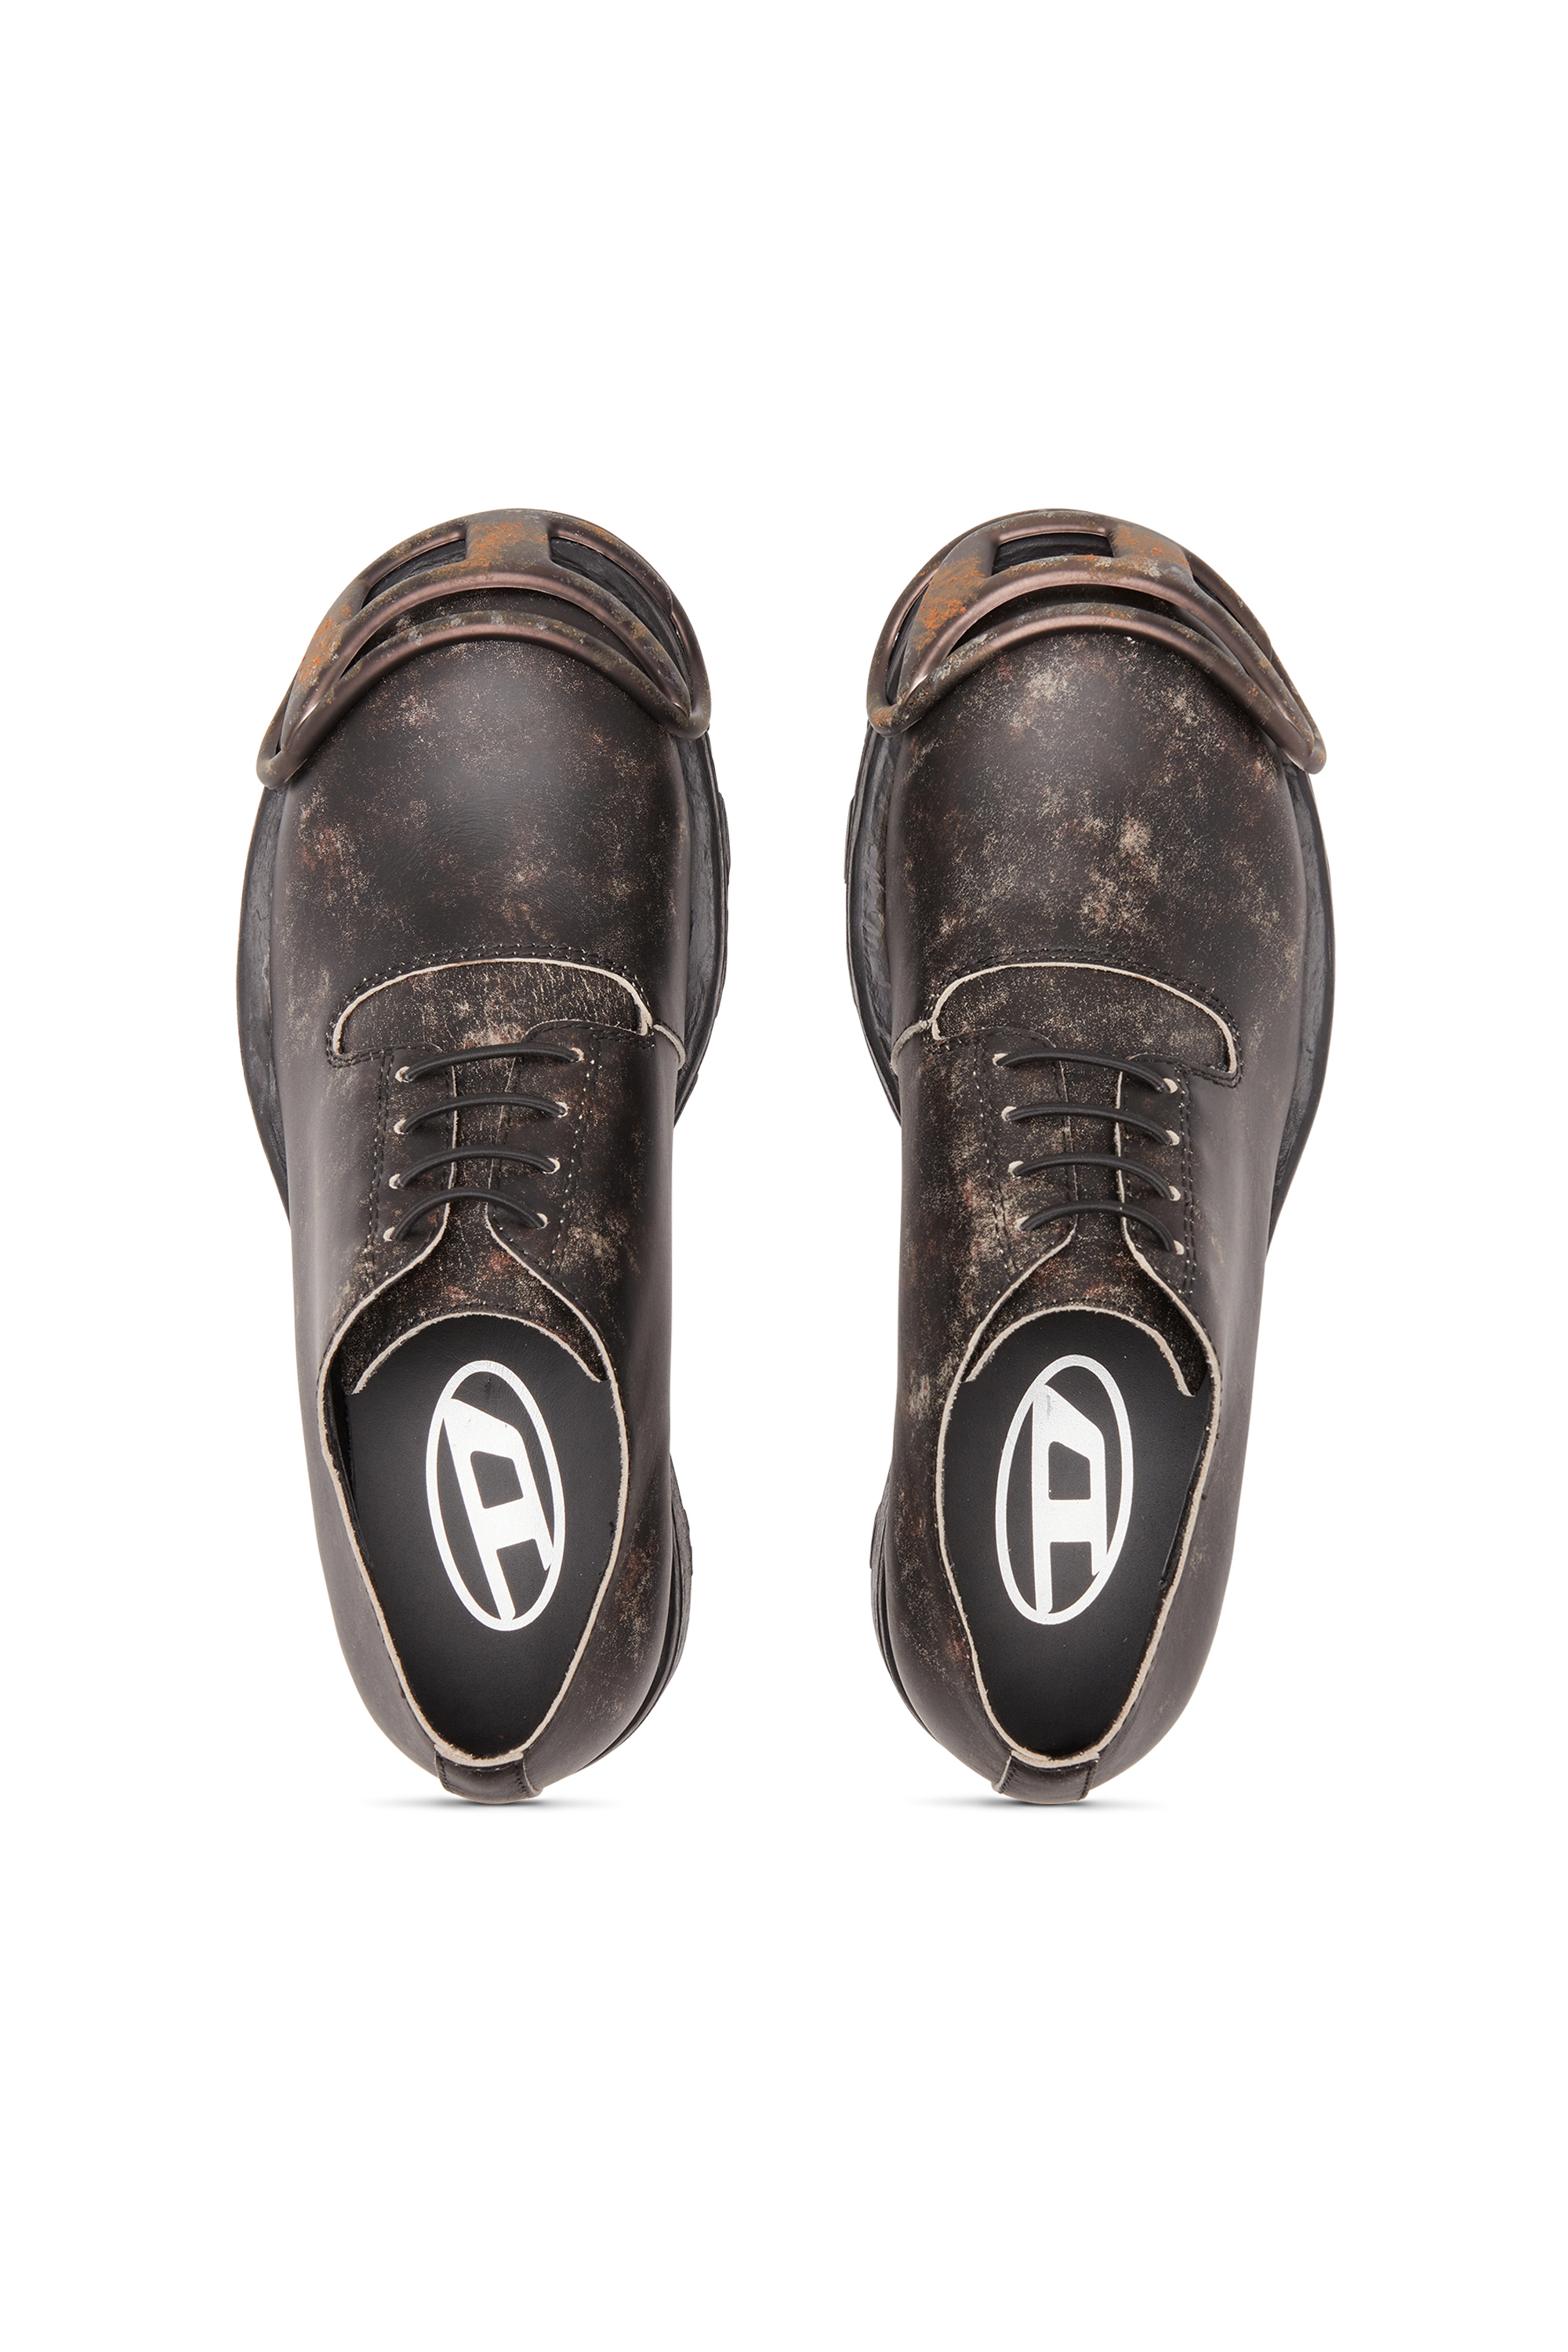 Diesel - D-HAMMER SO D, Man D-Hammer-Derby shoes in treated leather in Brown - Image 6